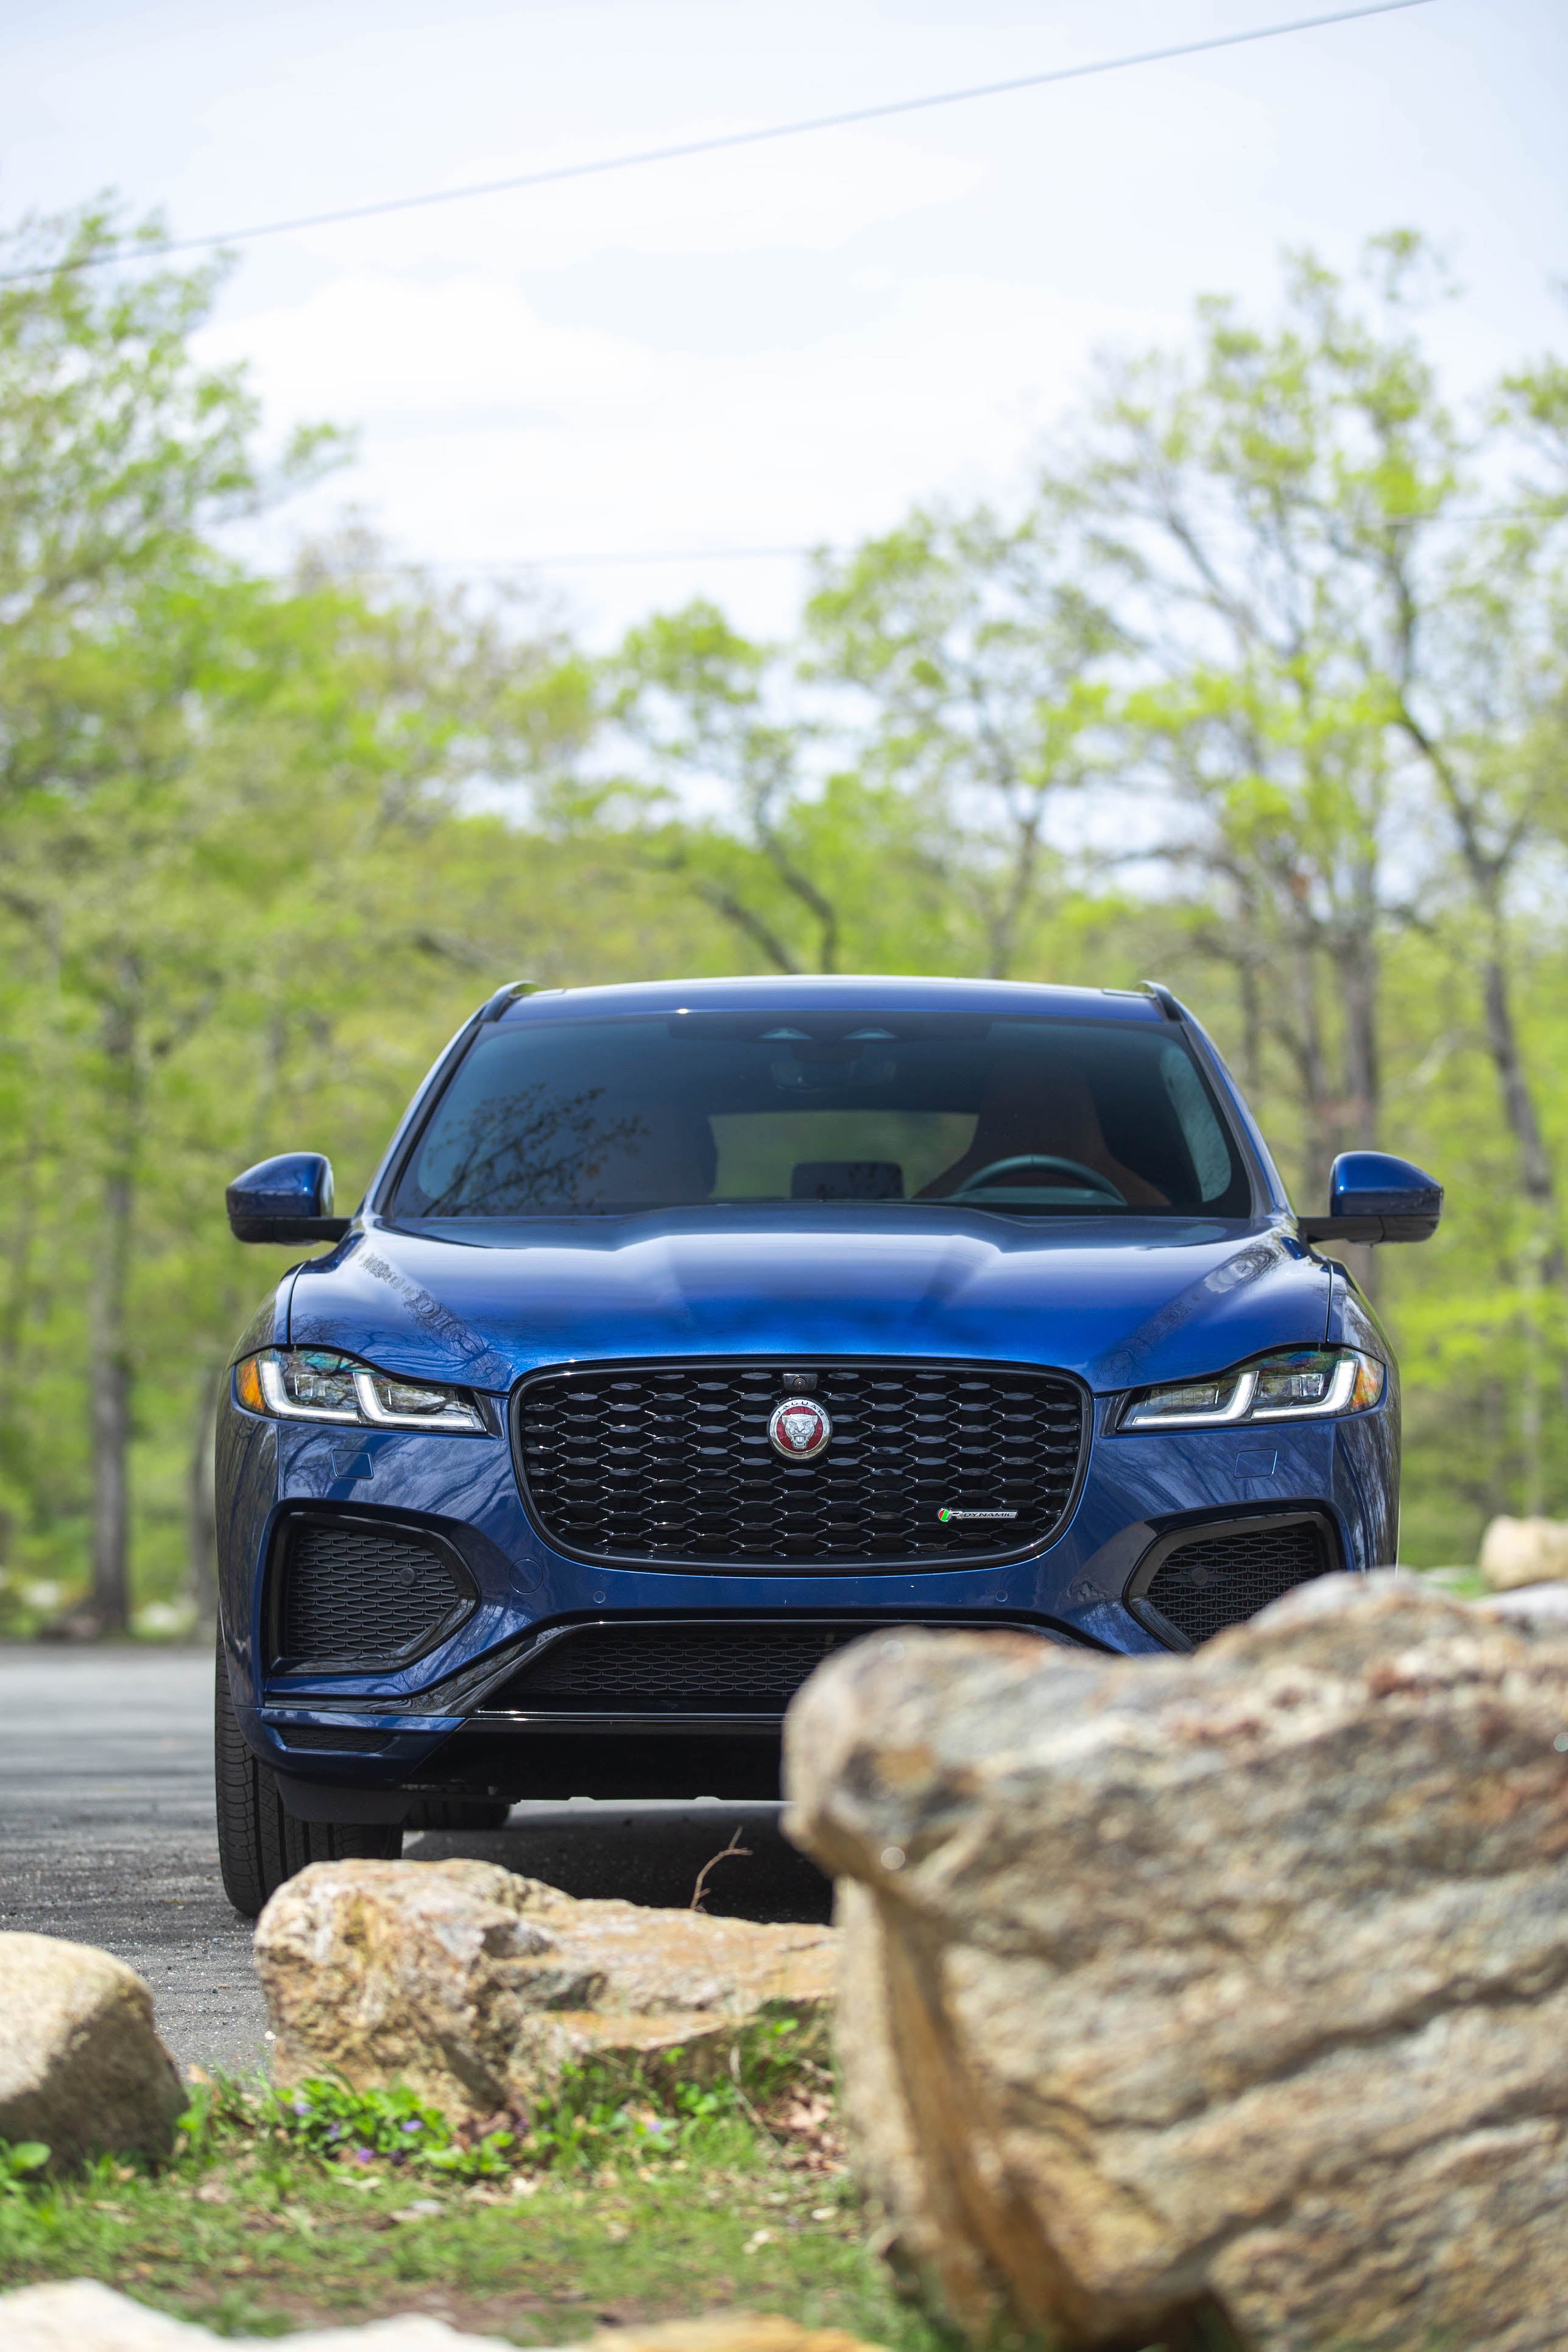 2021 Jaguar F-Pace Review: A 395-HP SUV That Stands Out With Luxury and  Performance